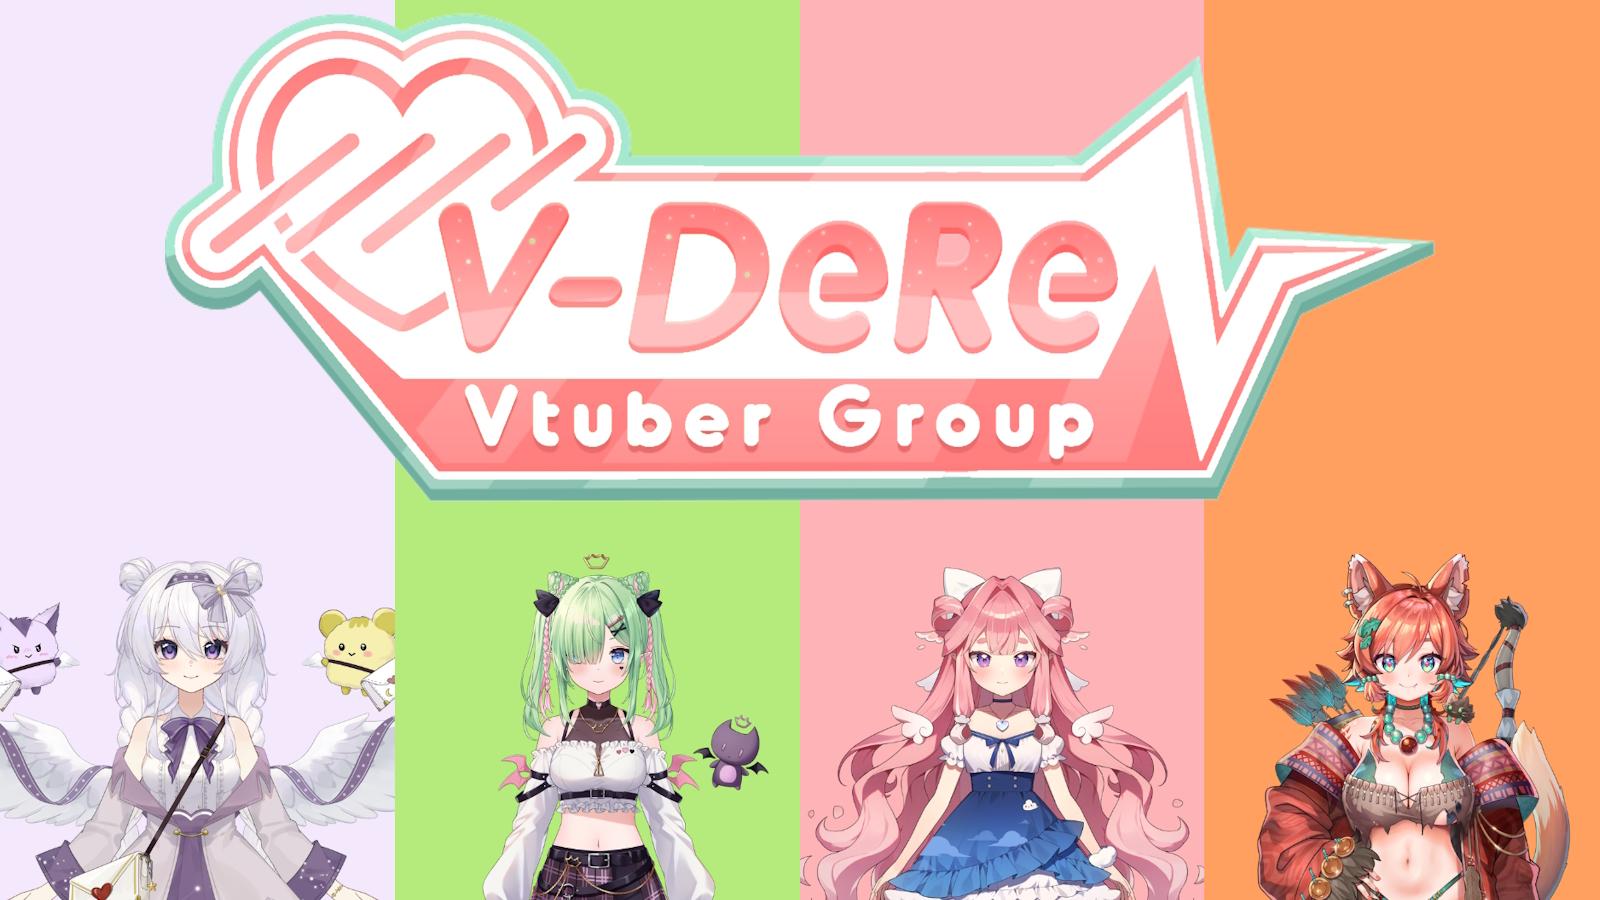 V-Dere are a new VTuber group featuring four ex-indie members.